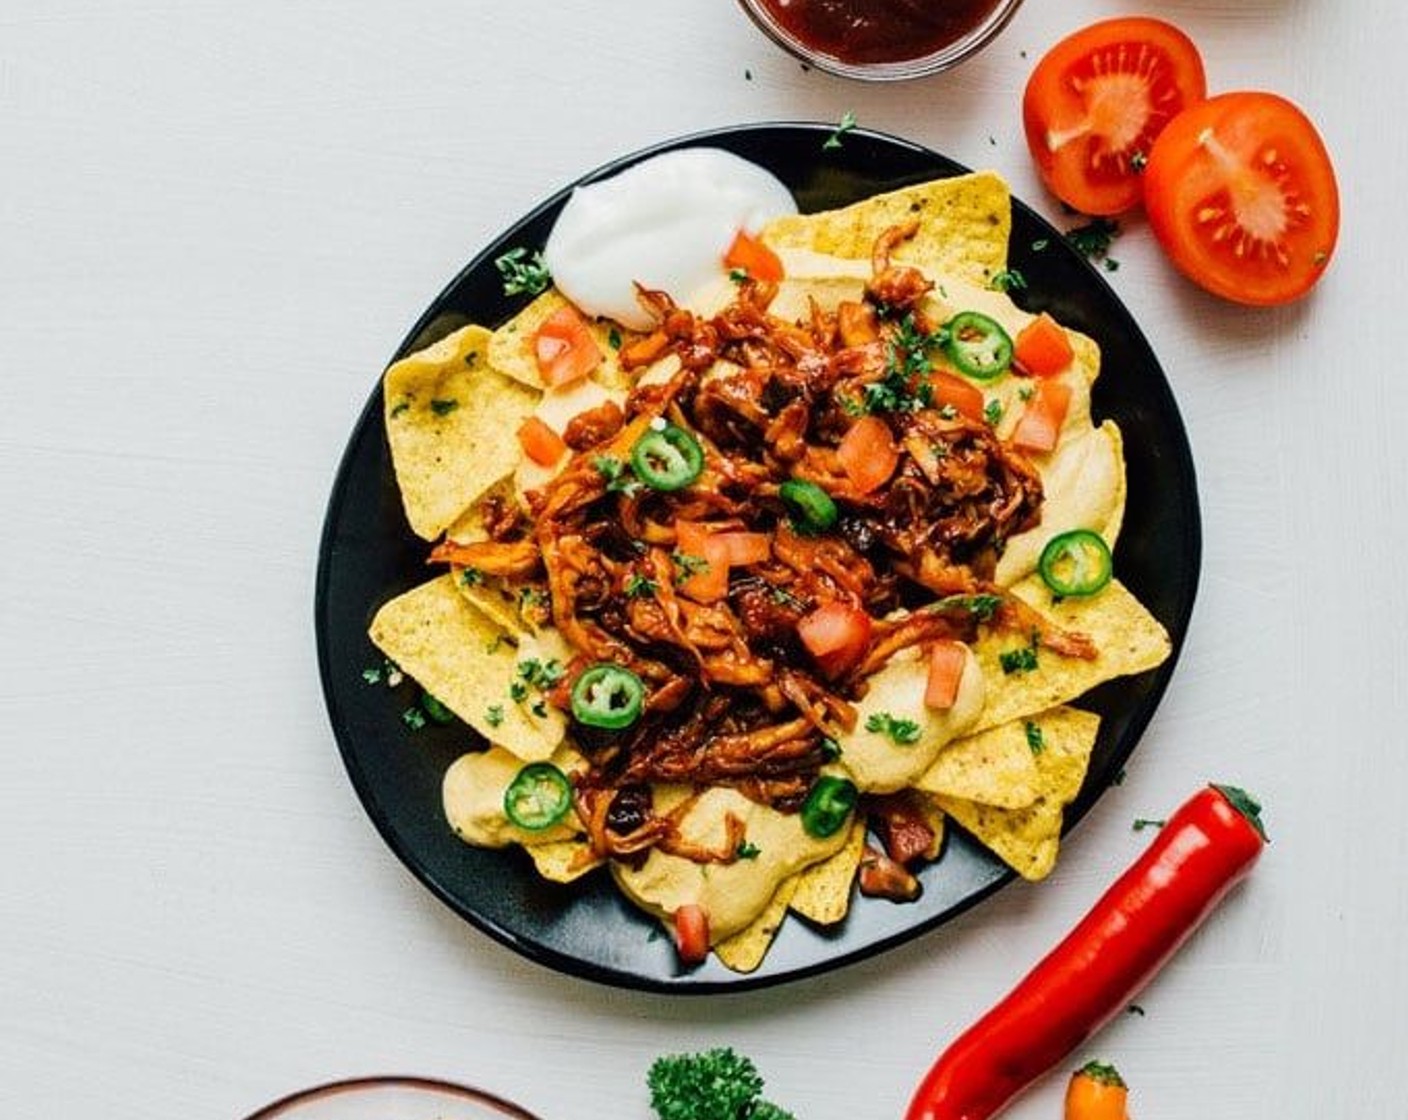 Vegan Nachos with BBQ “Pulled Pork” and Queso